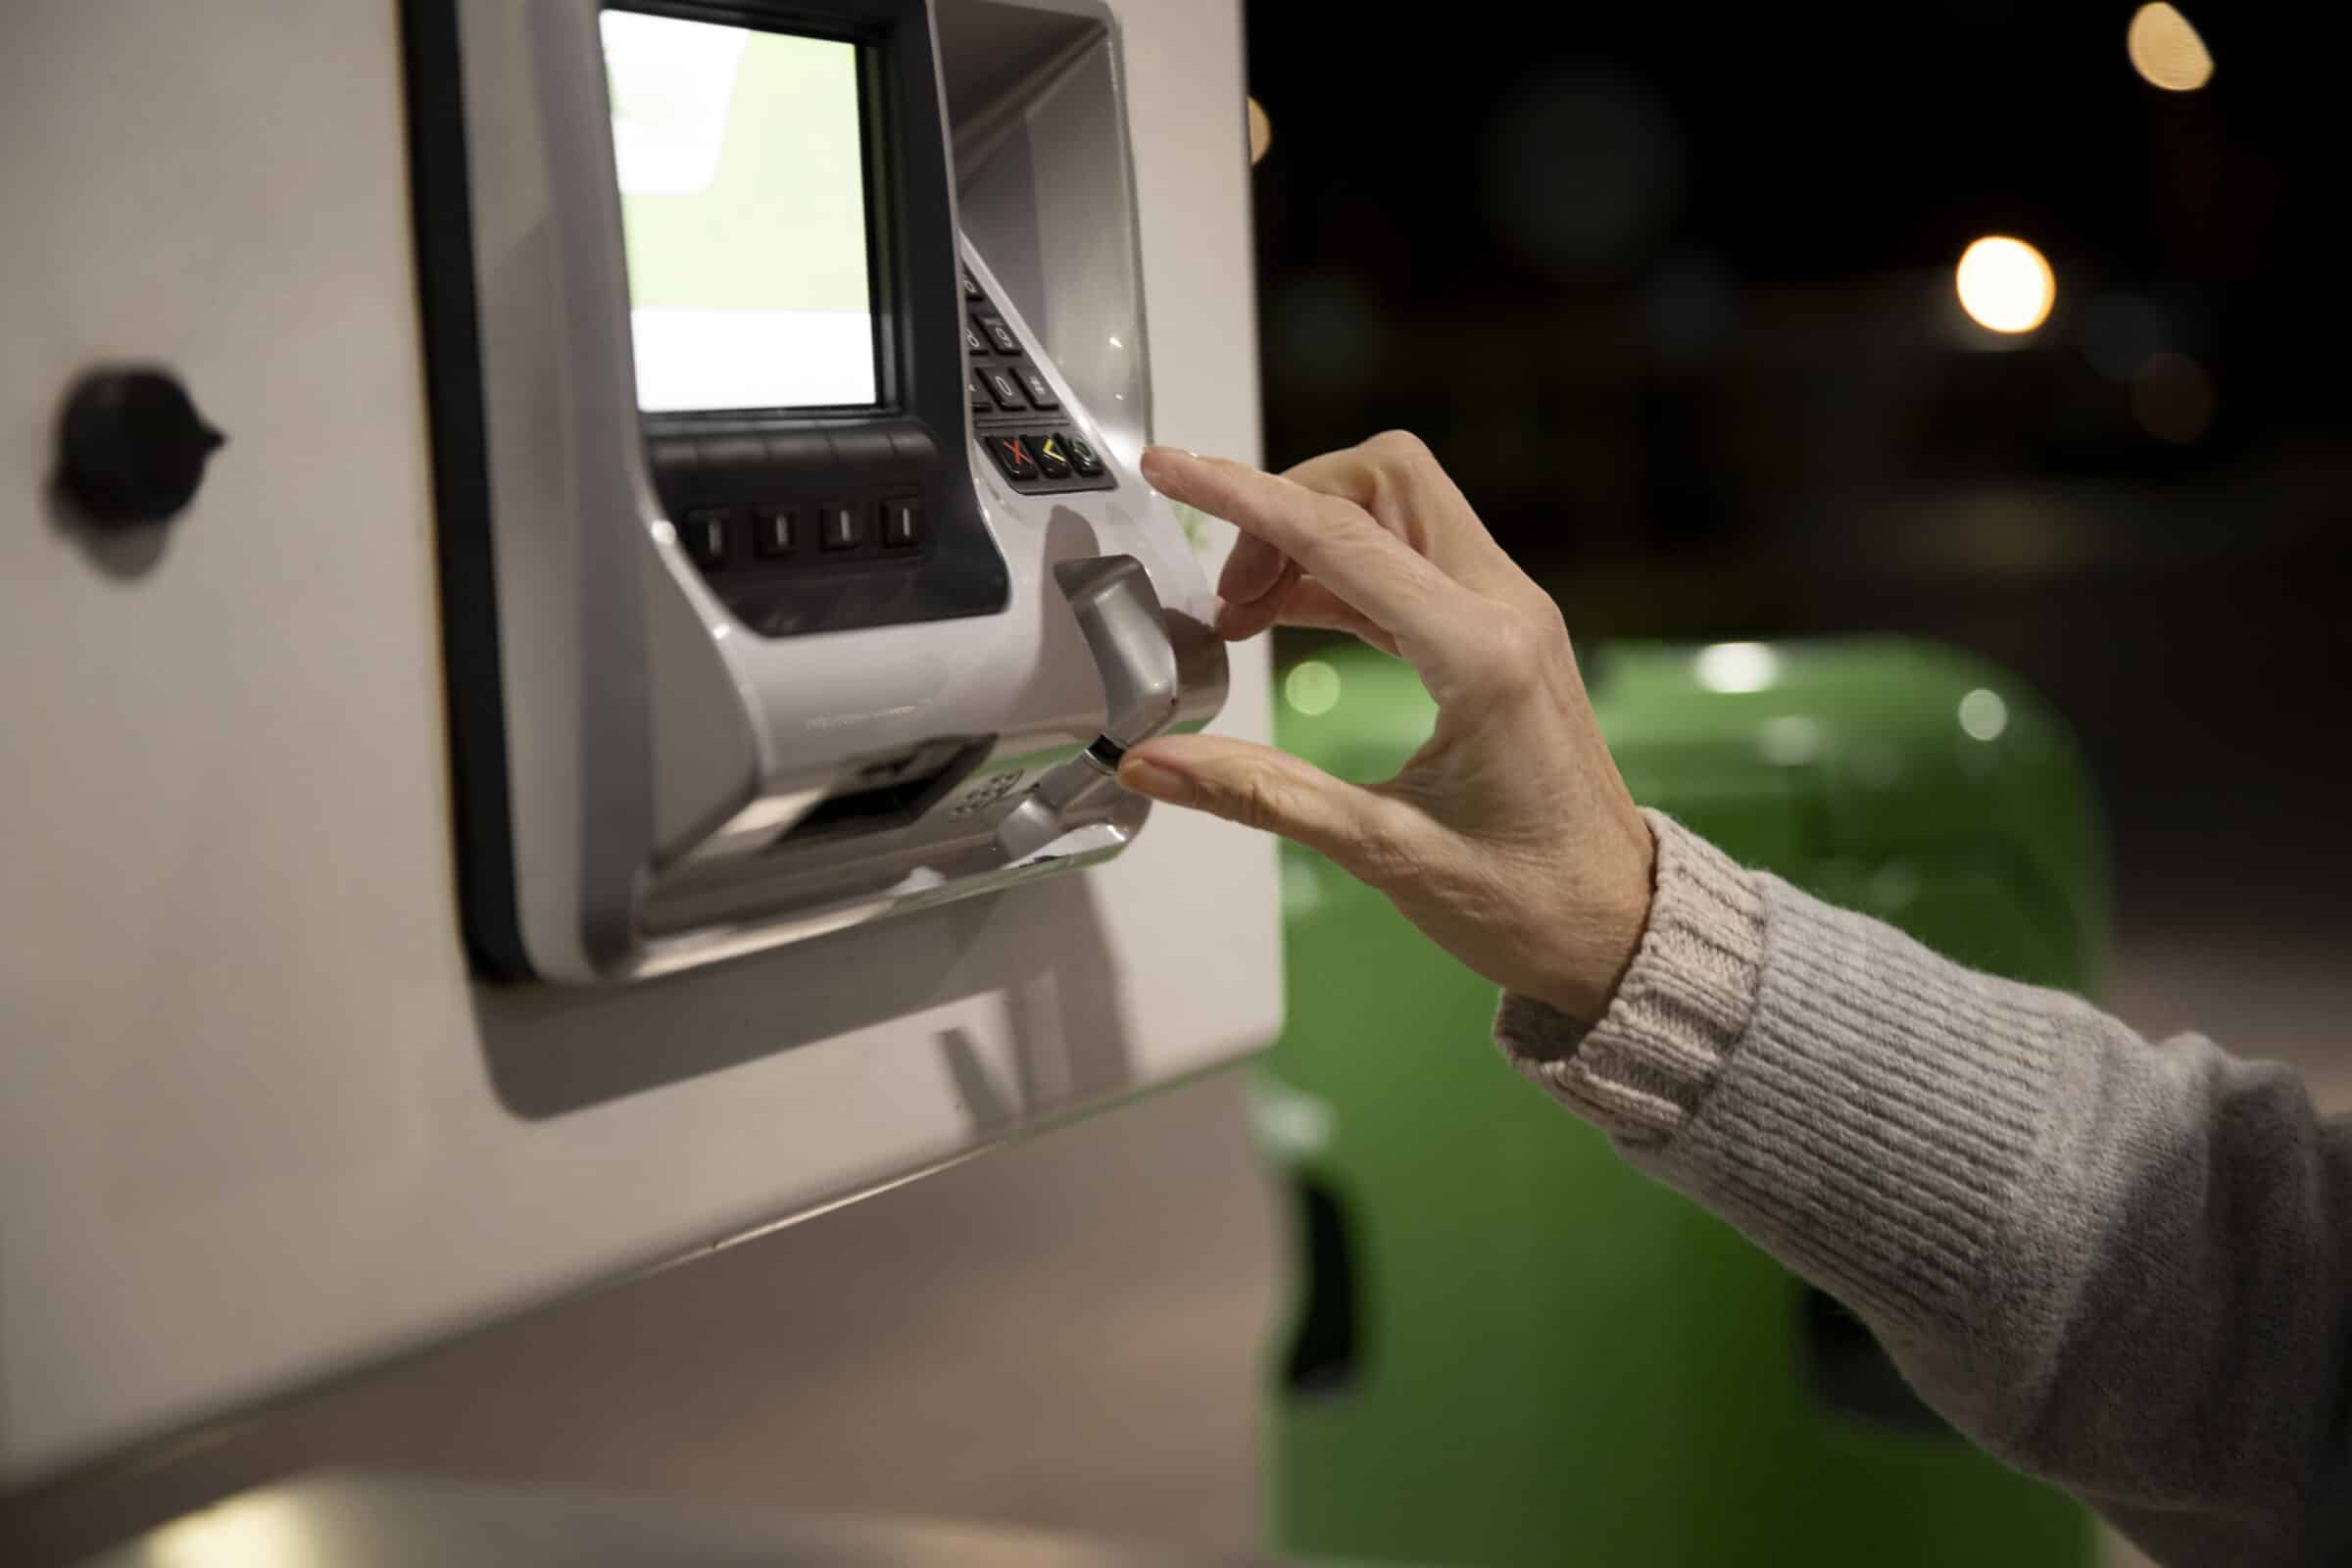 Woman using an ATM with built-in facial recognition